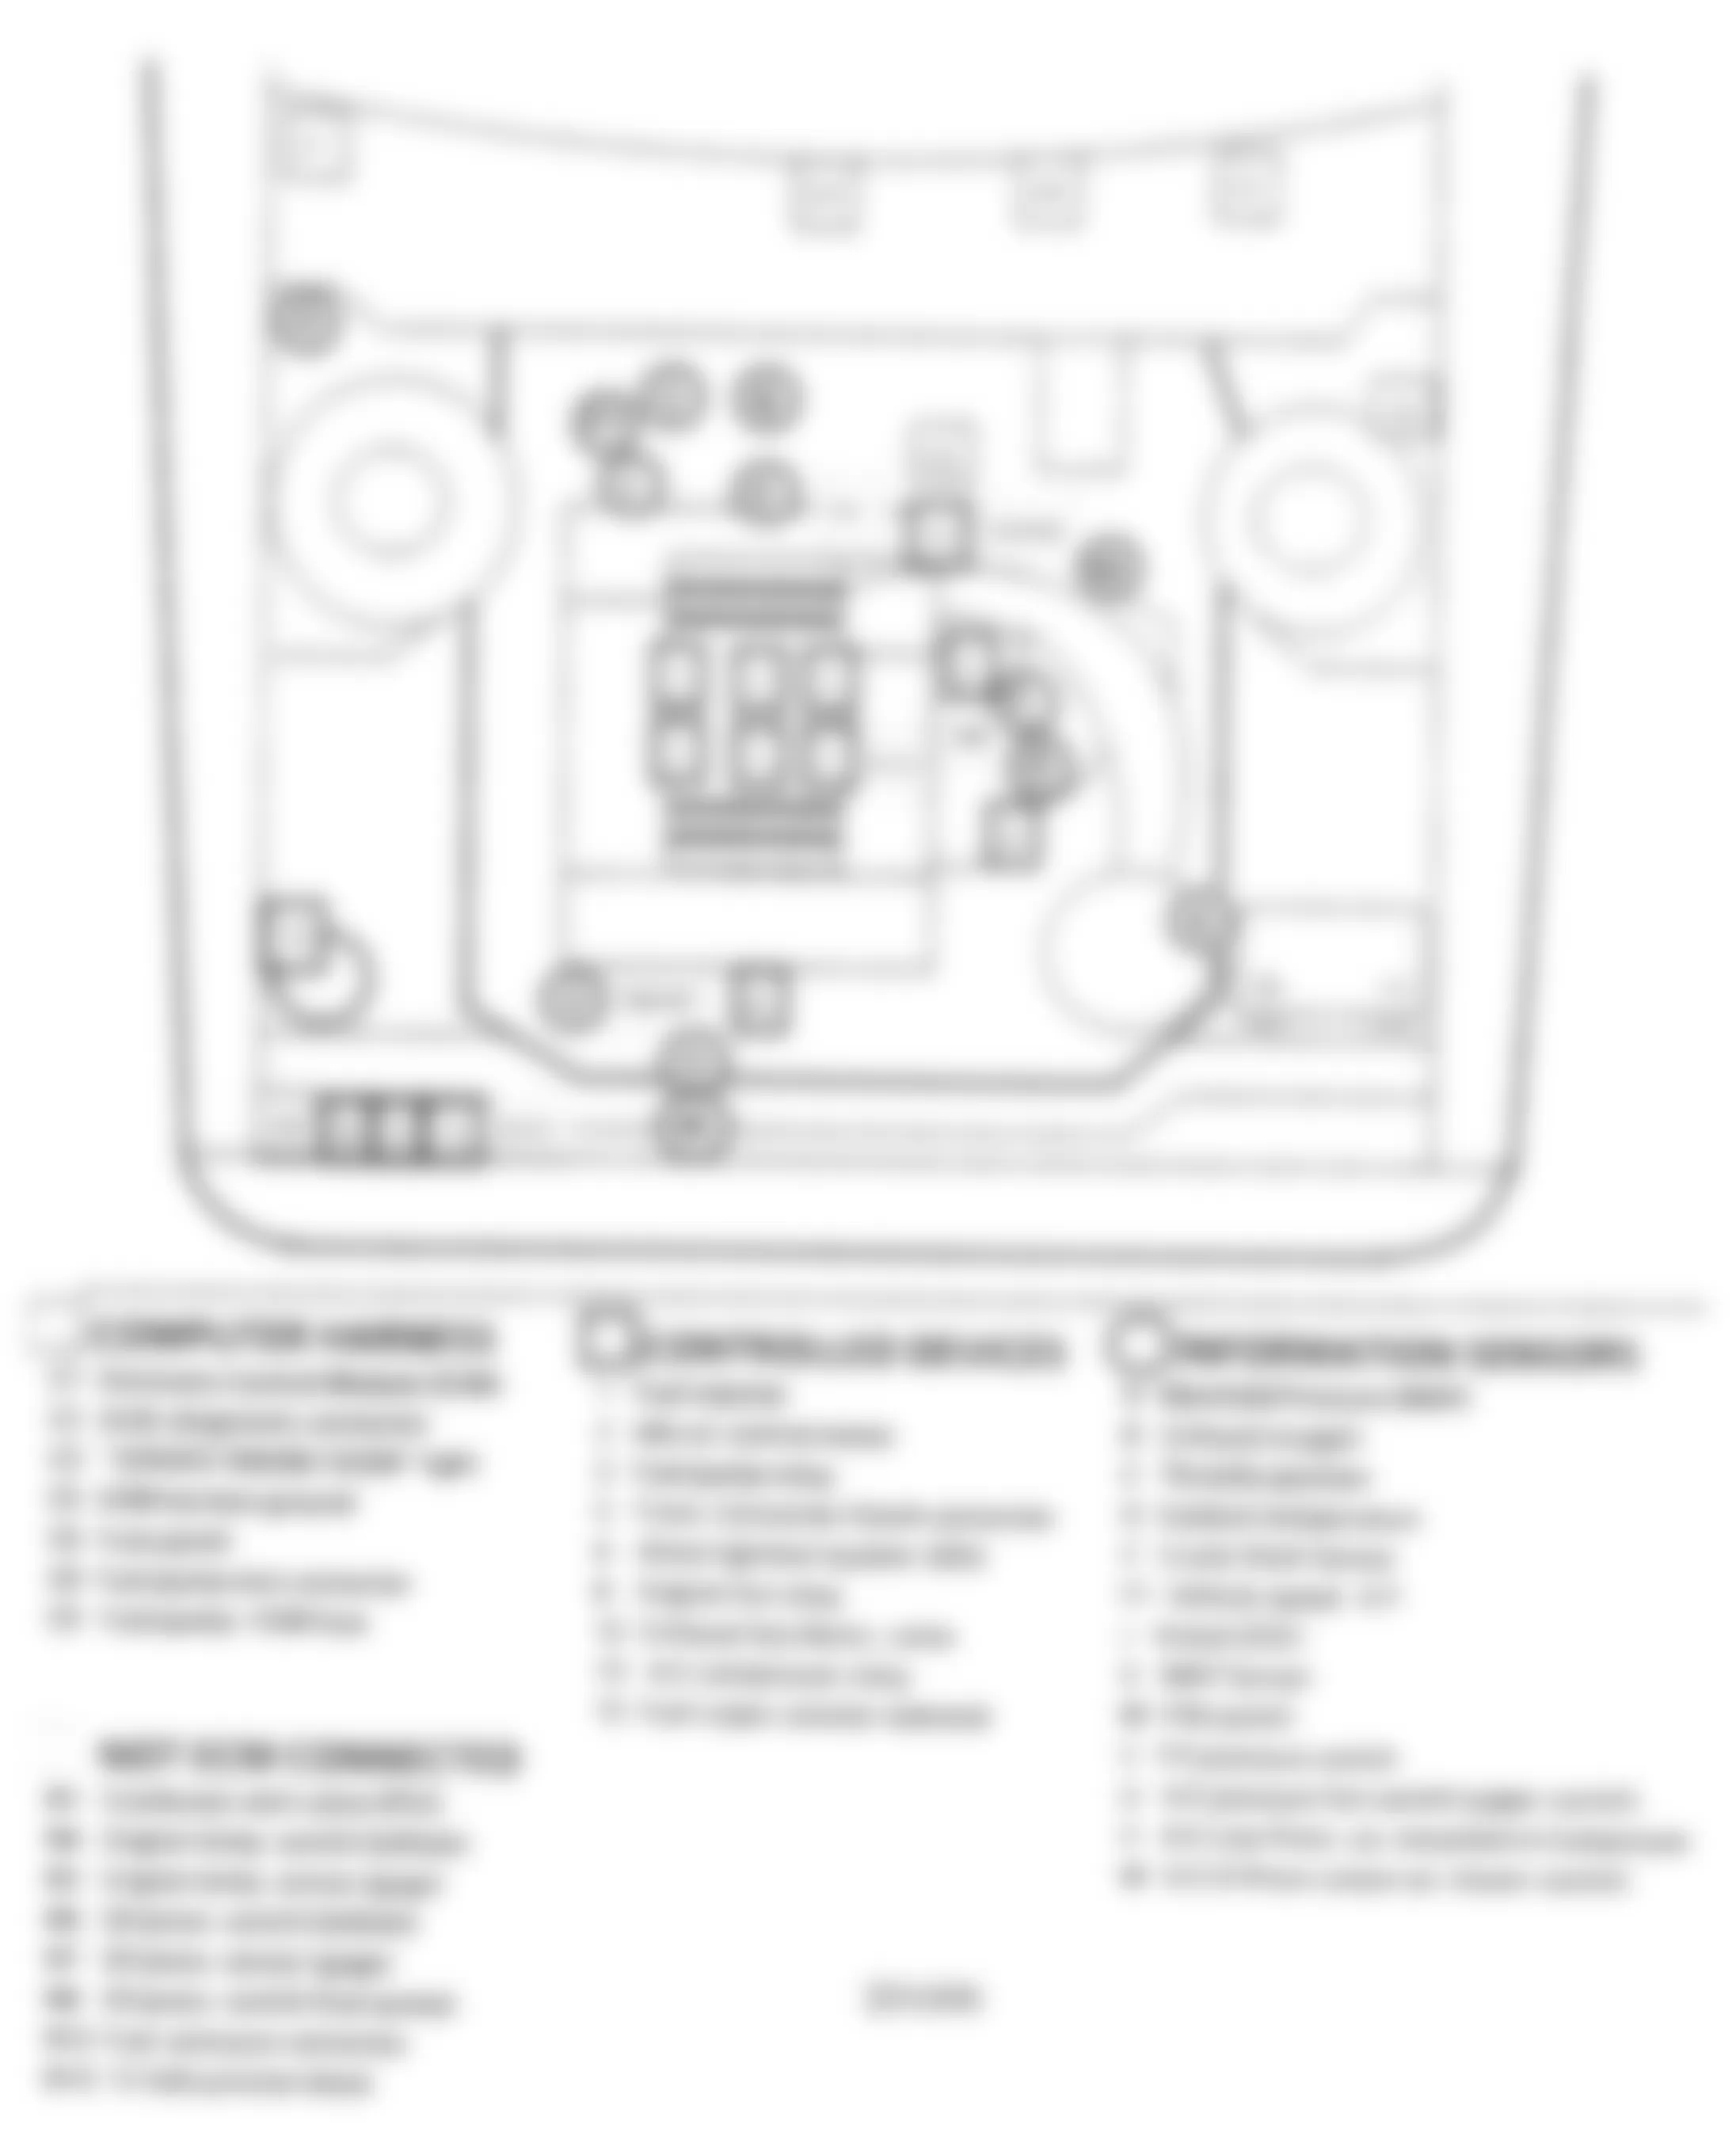 Buick Century Custom 1990 - Component Locations -  Component Locations (3 Of 6)